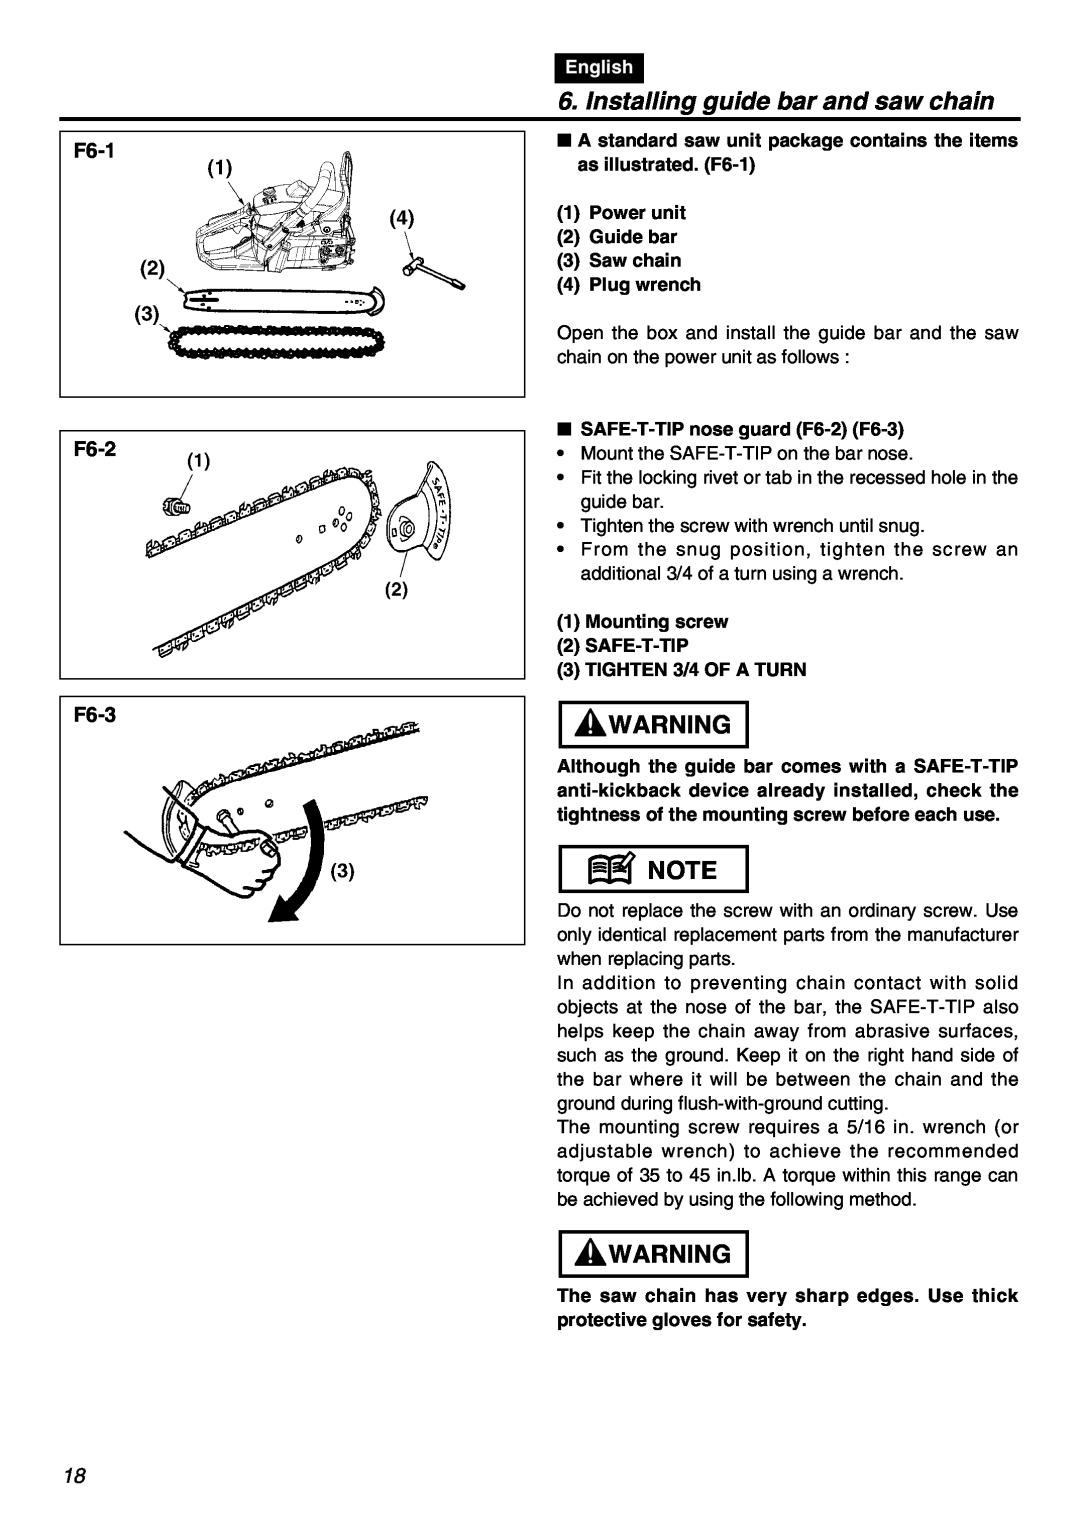 RedMax GZ400 manual Installing guide bar and saw chain, F6-1 F6-2 F6-3, English 